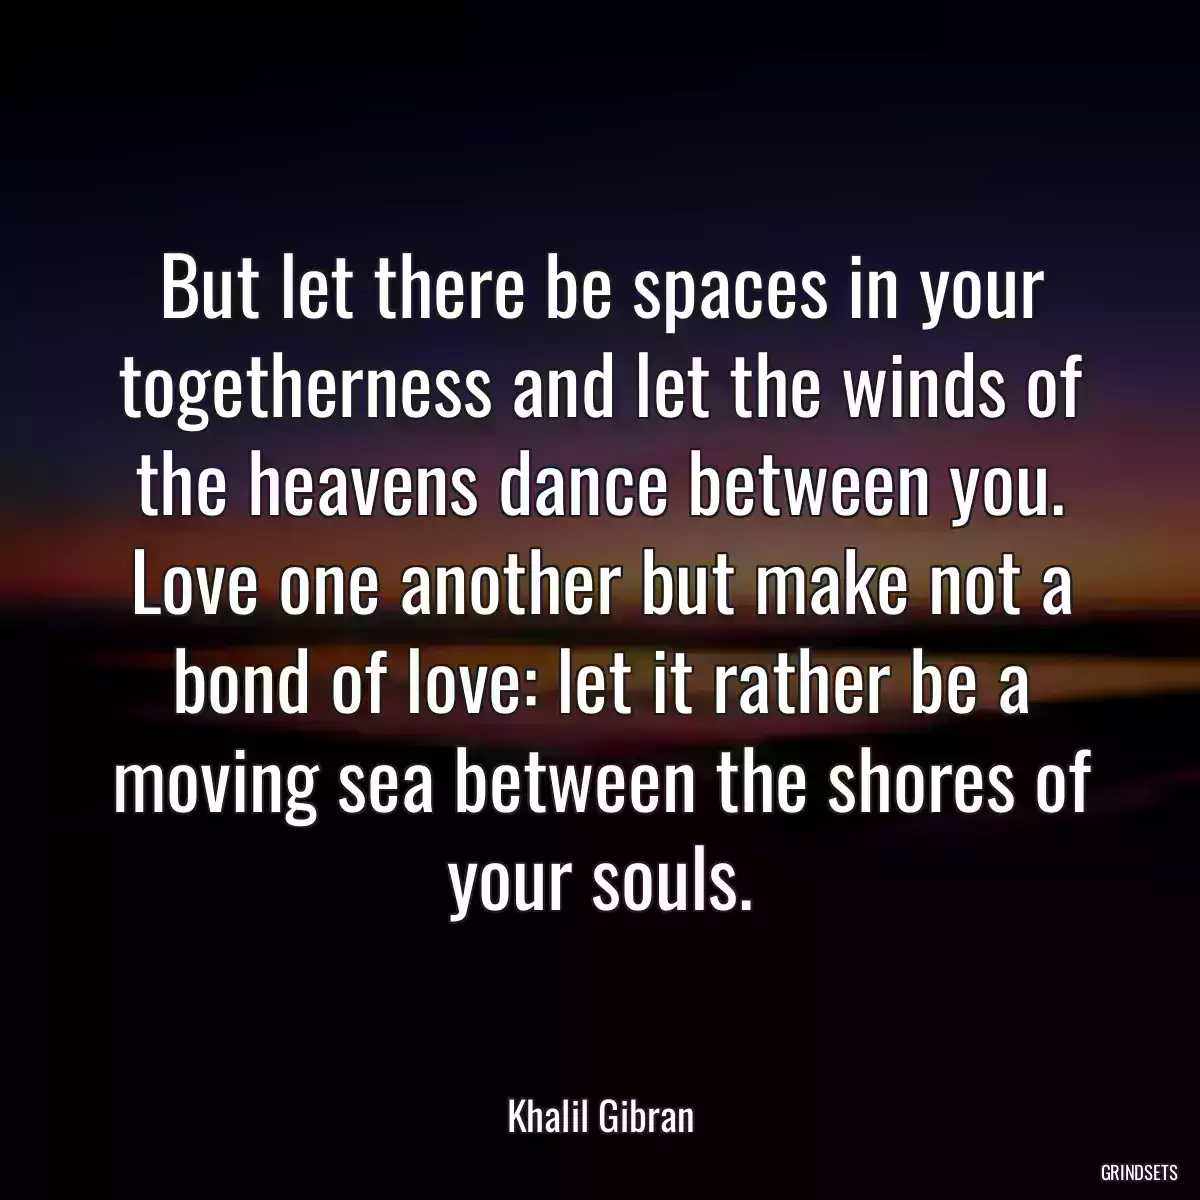 But let there be spaces in your togetherness and let the winds of the heavens dance between you. Love one another but make not a bond of love: let it rather be a moving sea between the shores of your souls.